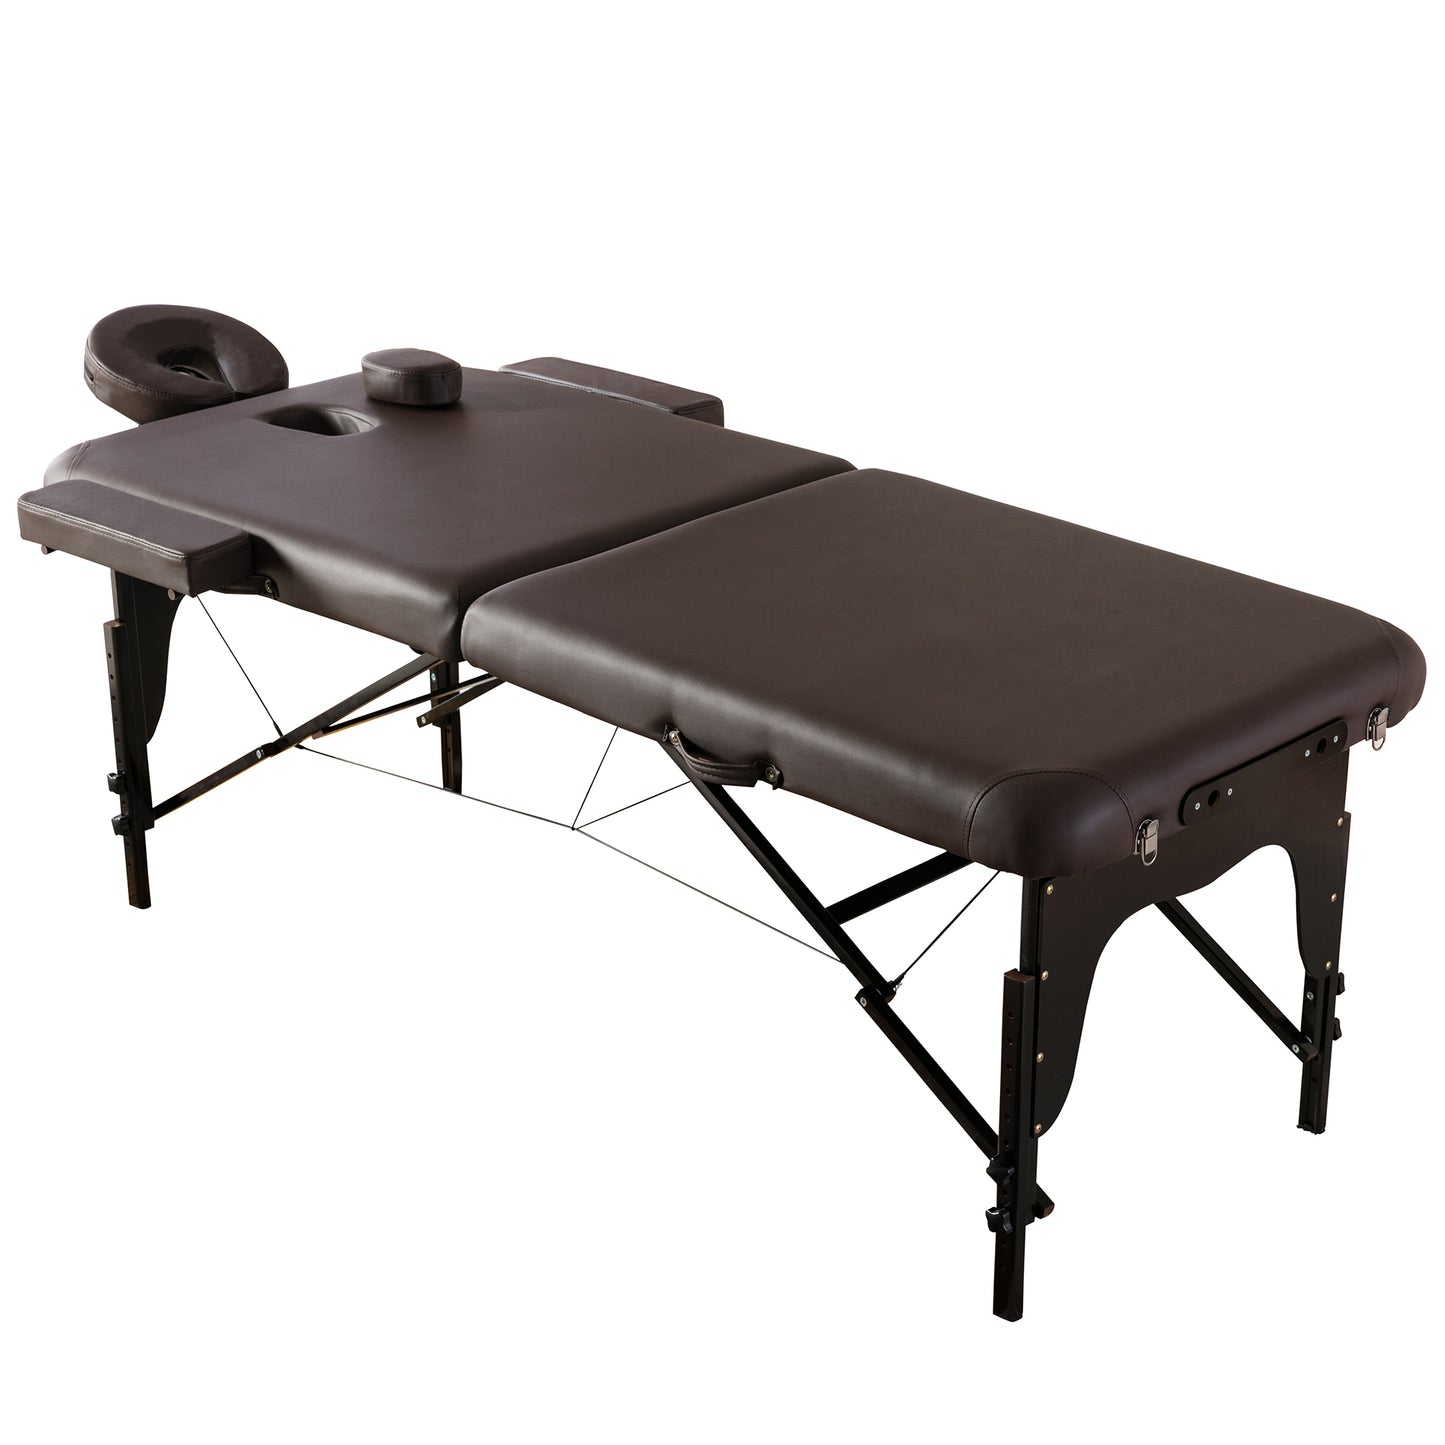 HengMing  Portable Massage Table 29 Inchs Wide PU  Leather